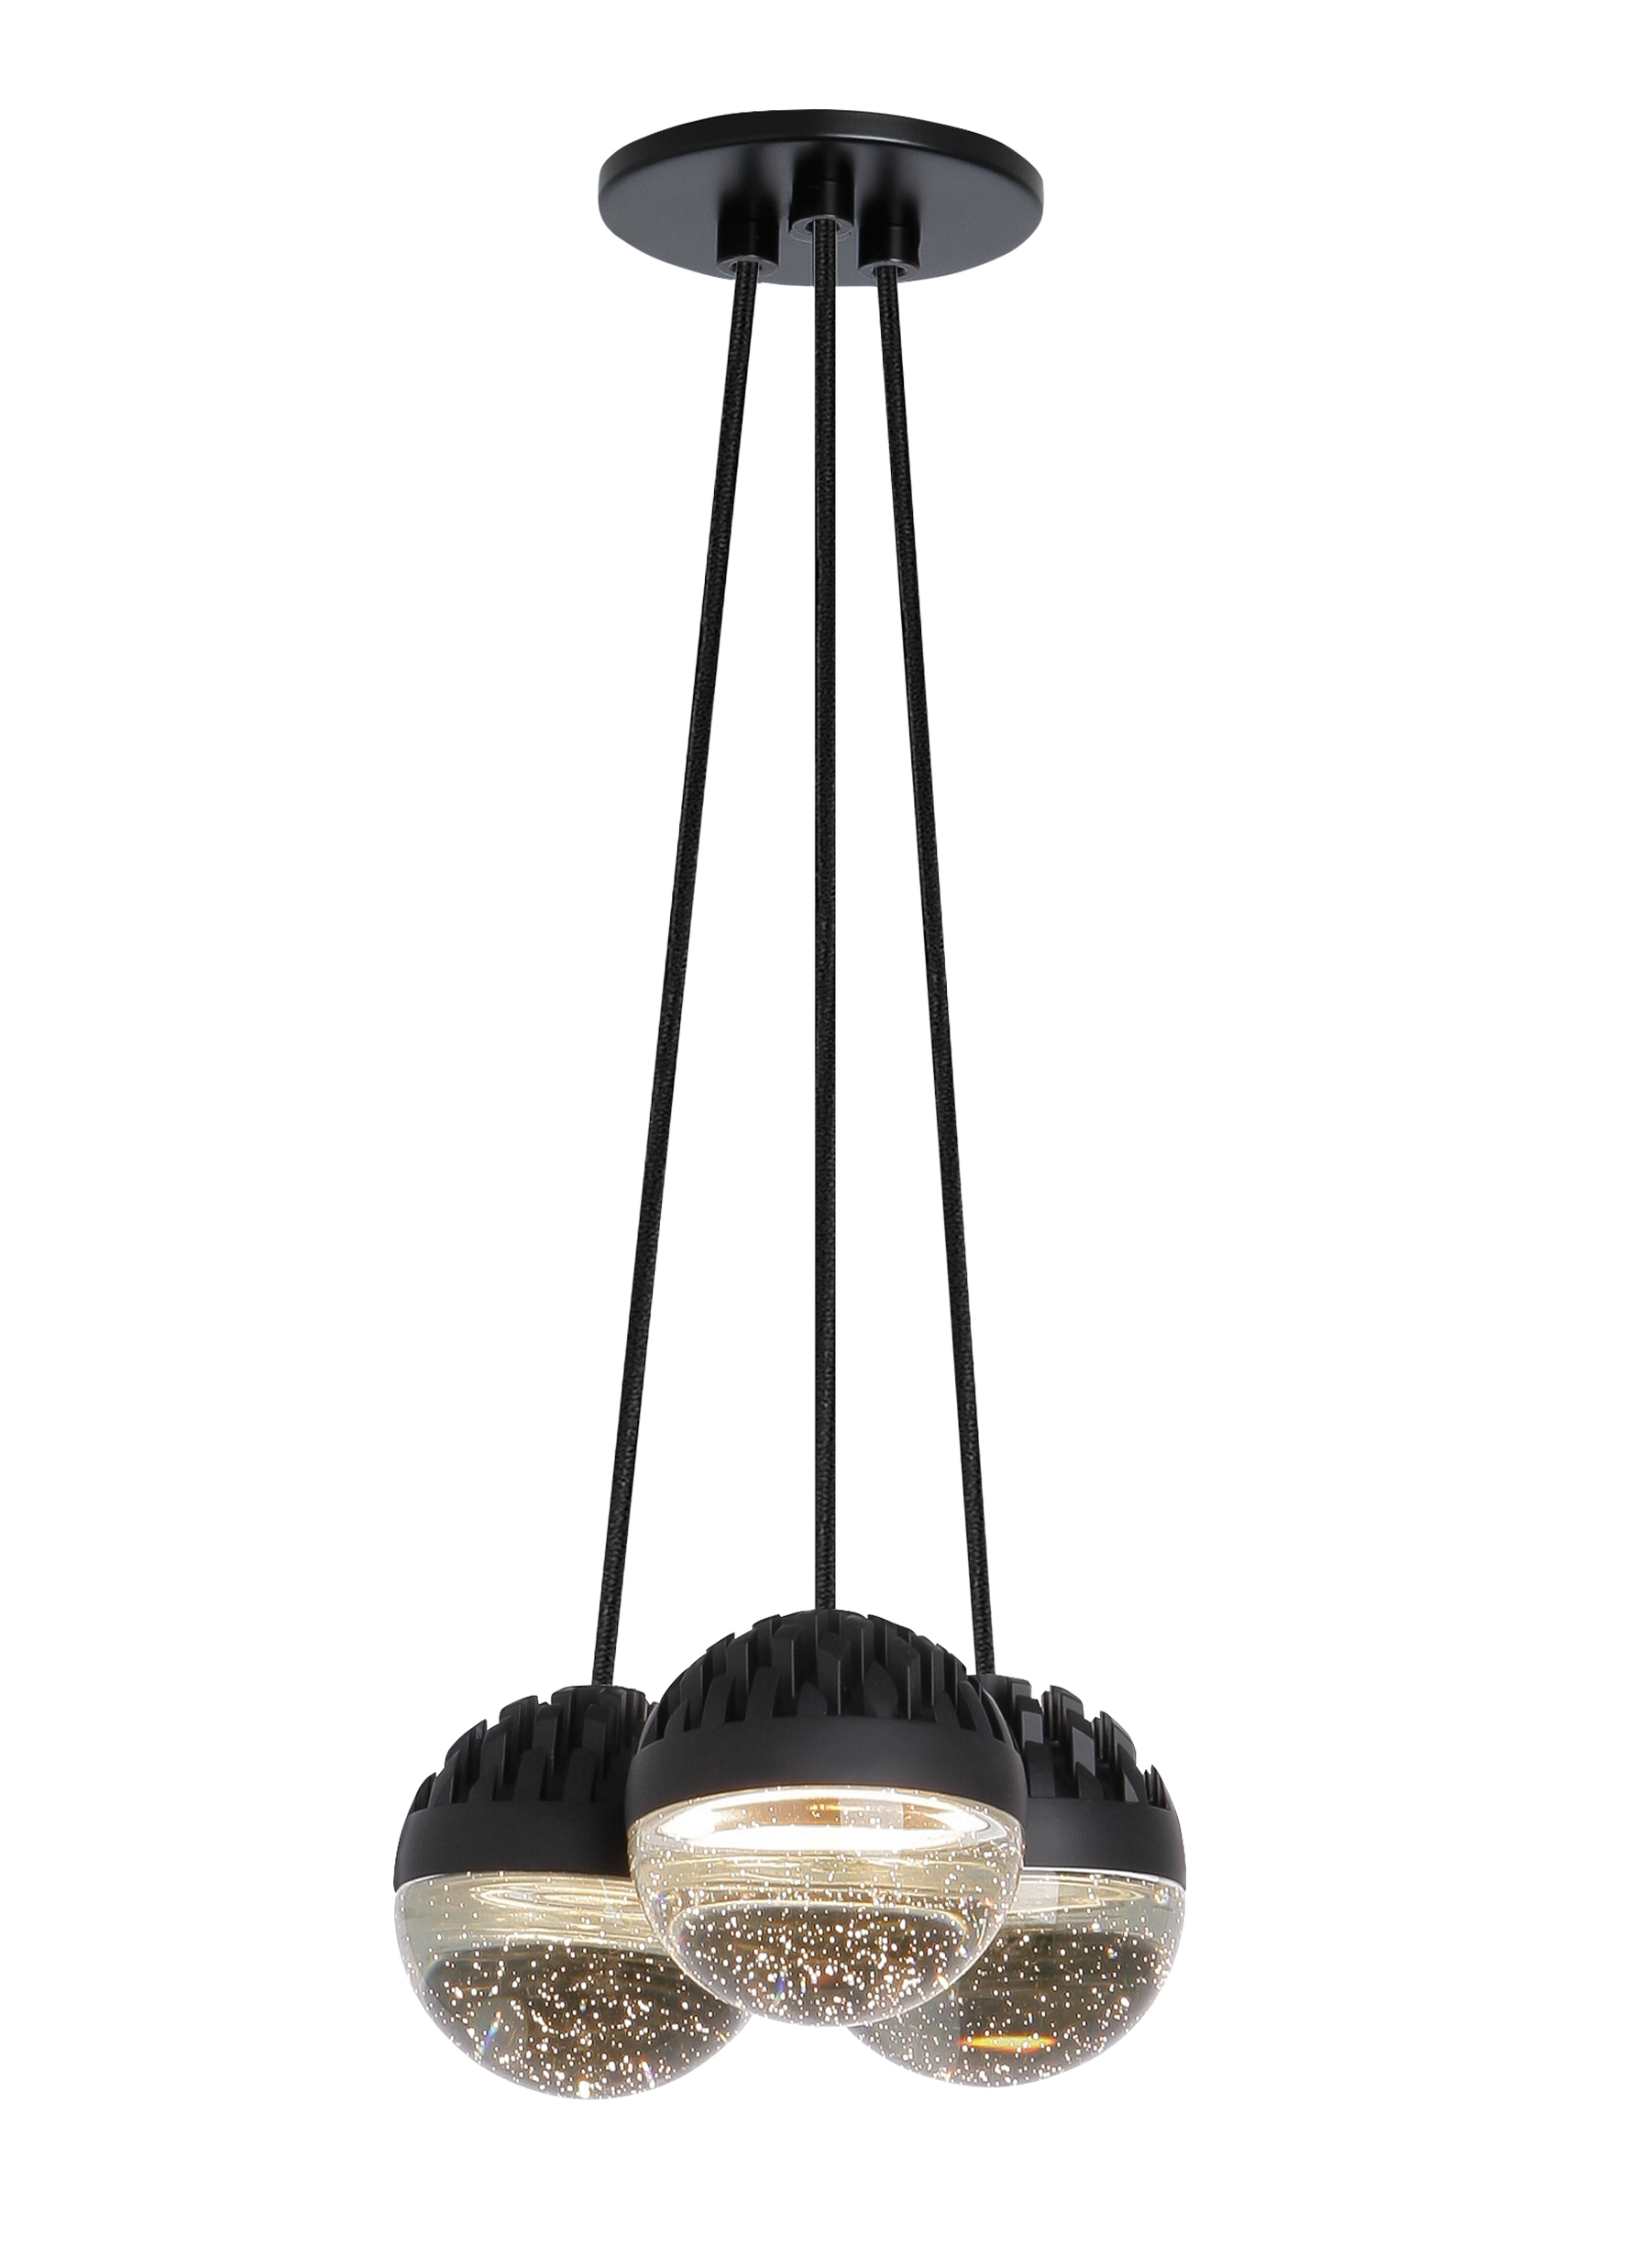 LBL Lighting's Sphere pendant can be hung alone or clustered in multi-ports to make three-, seven- and 11-pendant chandeliers.